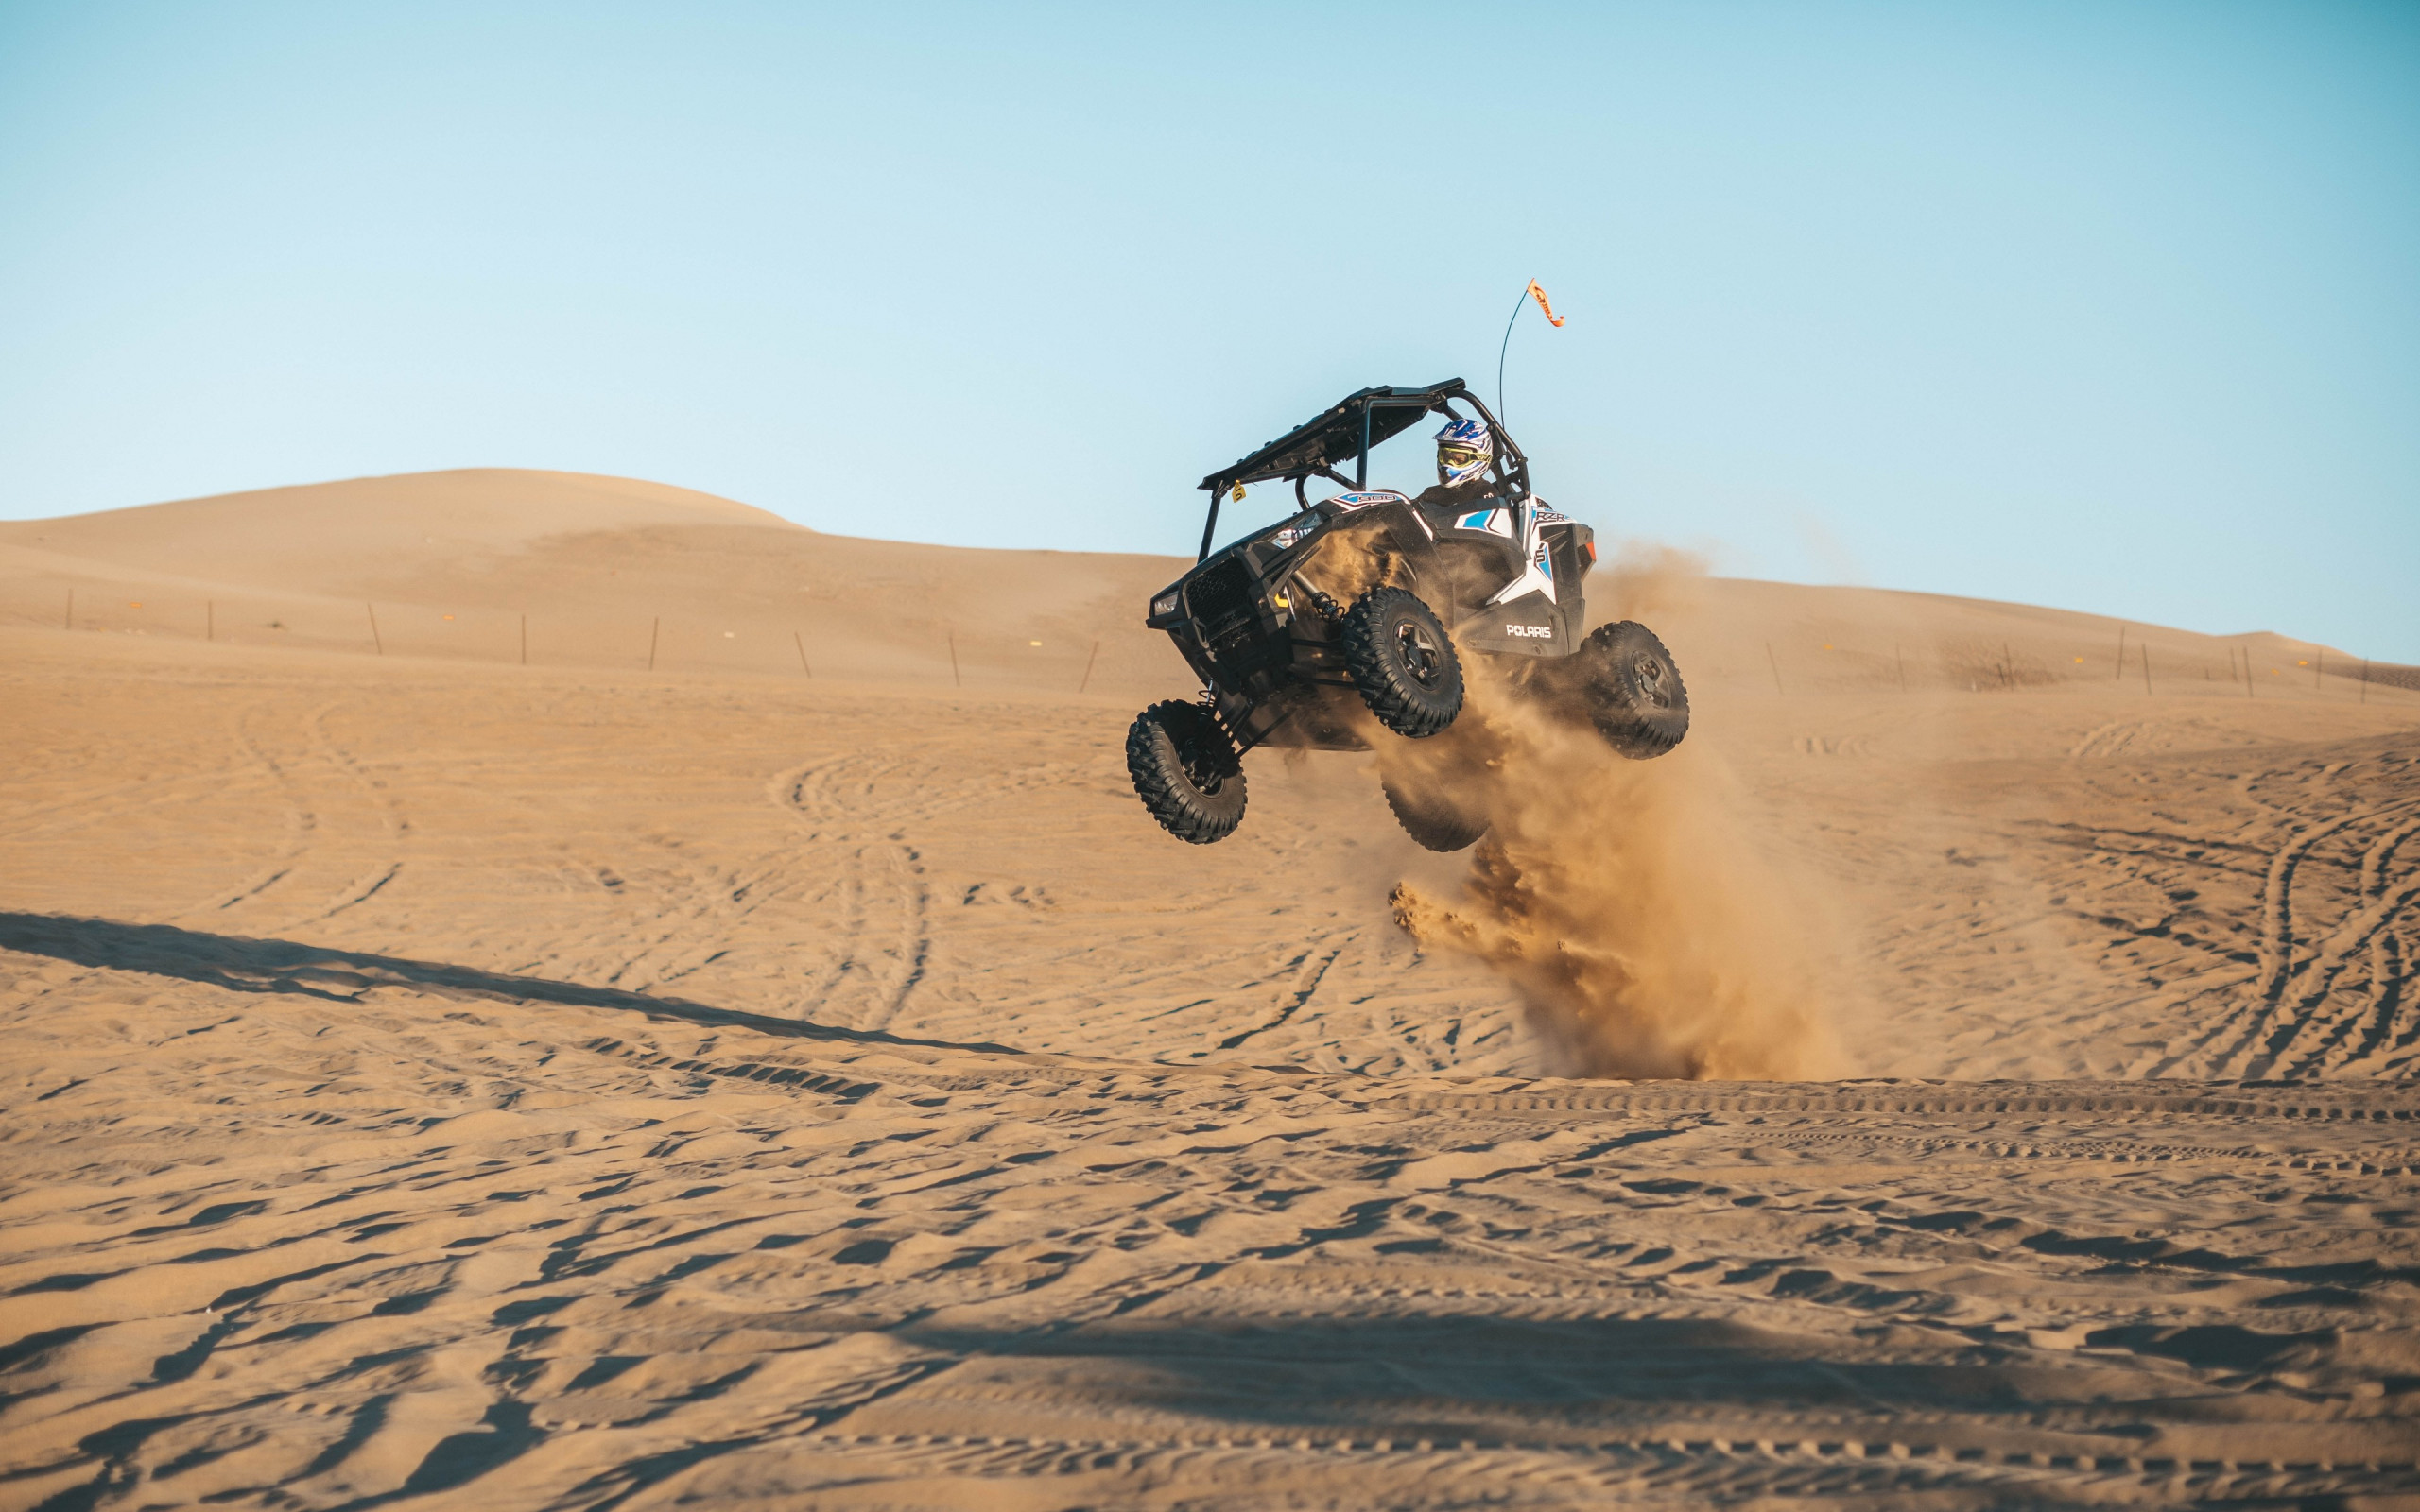 With ATV on the the sand dunes wallpaper 2560x1600